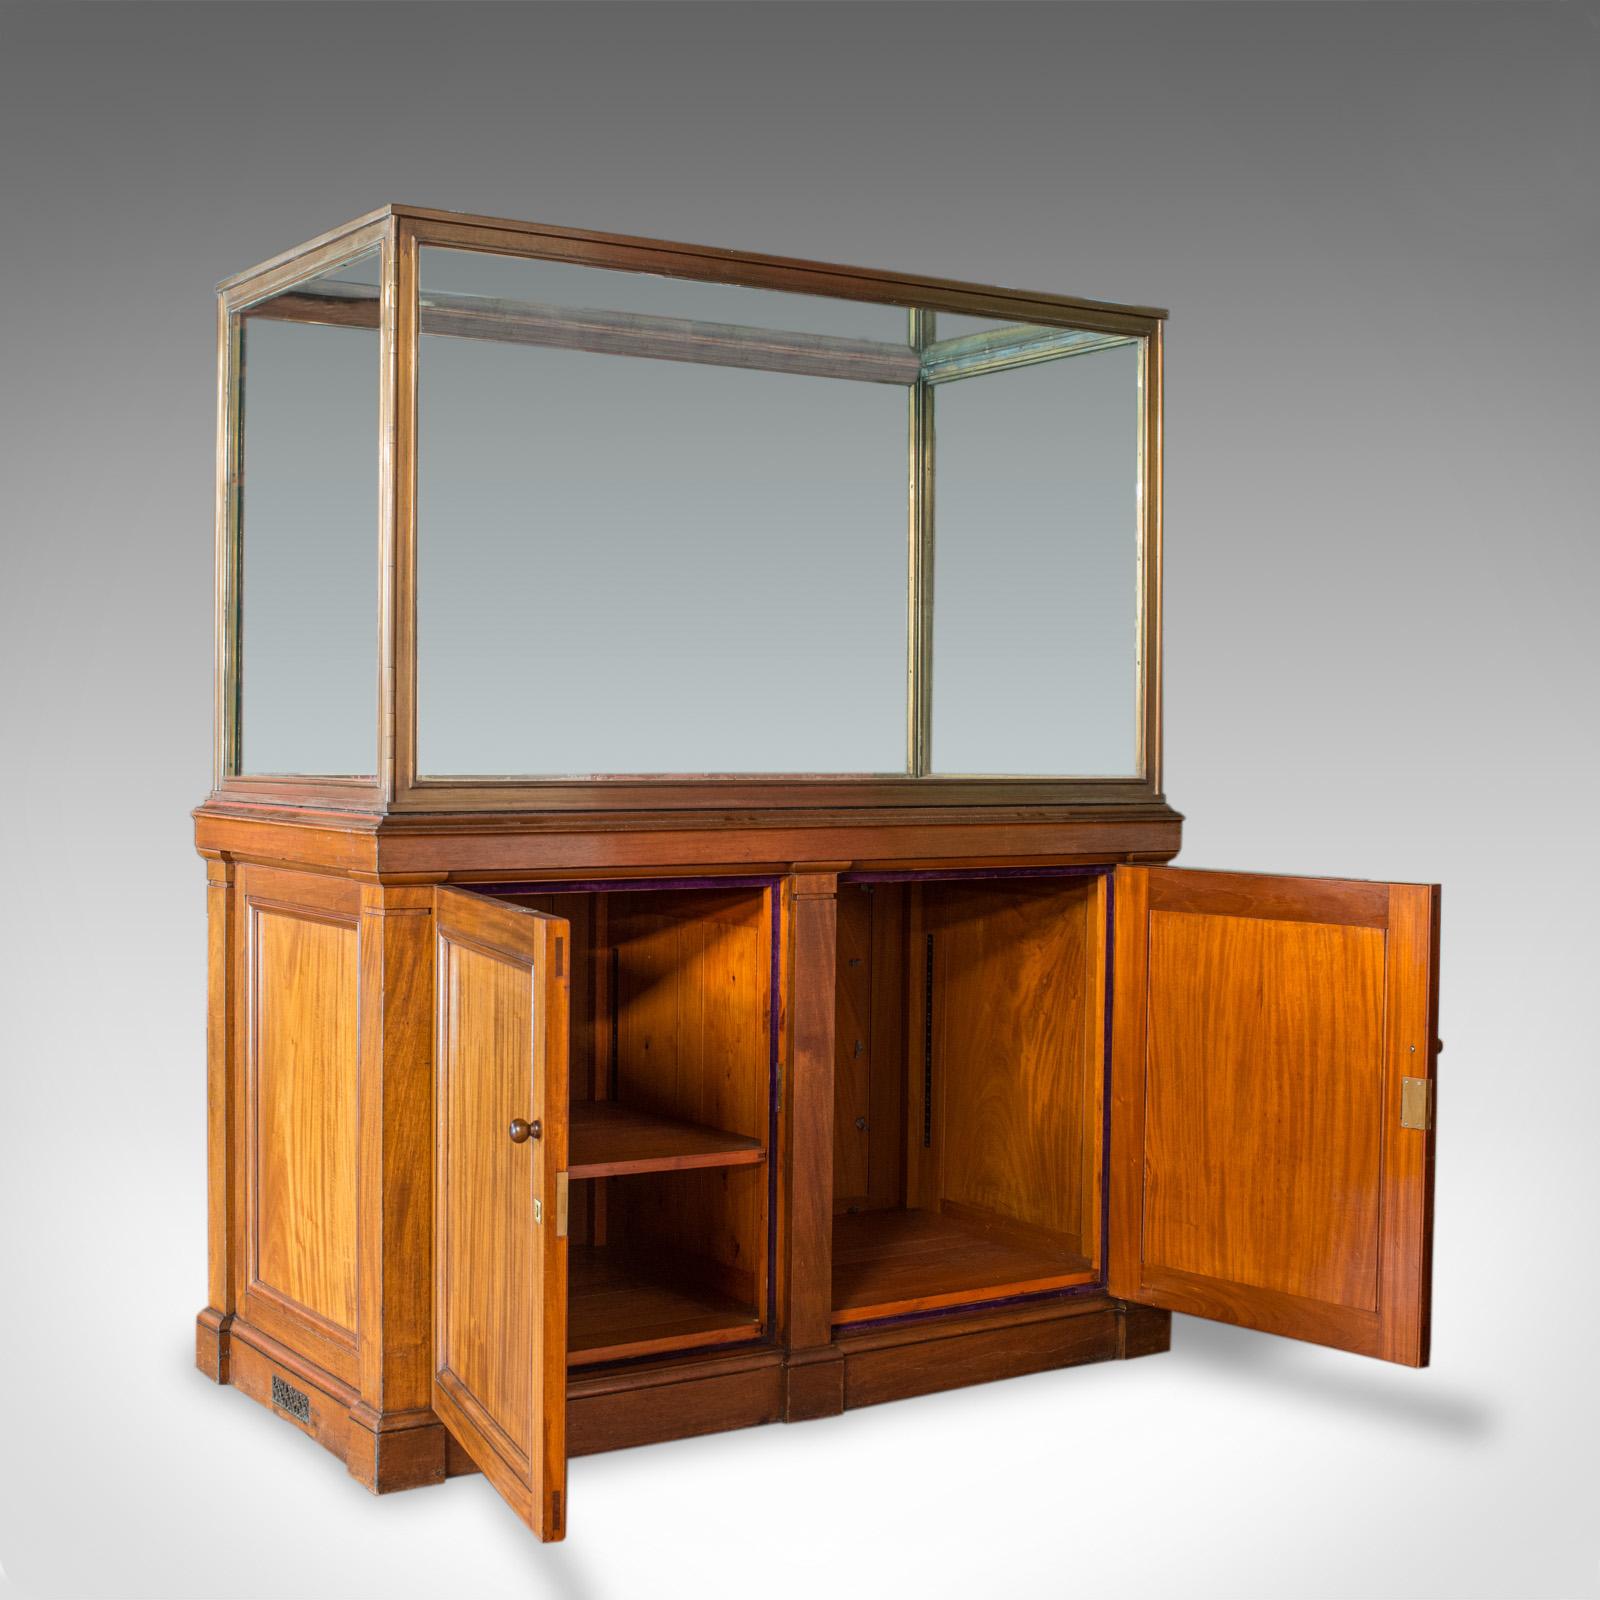 This is an antique display cabinet. An English, walnut and bronze showcase of museum quality and dating to the late 19th century, circa 1900.

Generous proportion and with a desirable aged patina
Select walnut displays fine grain interest and rich